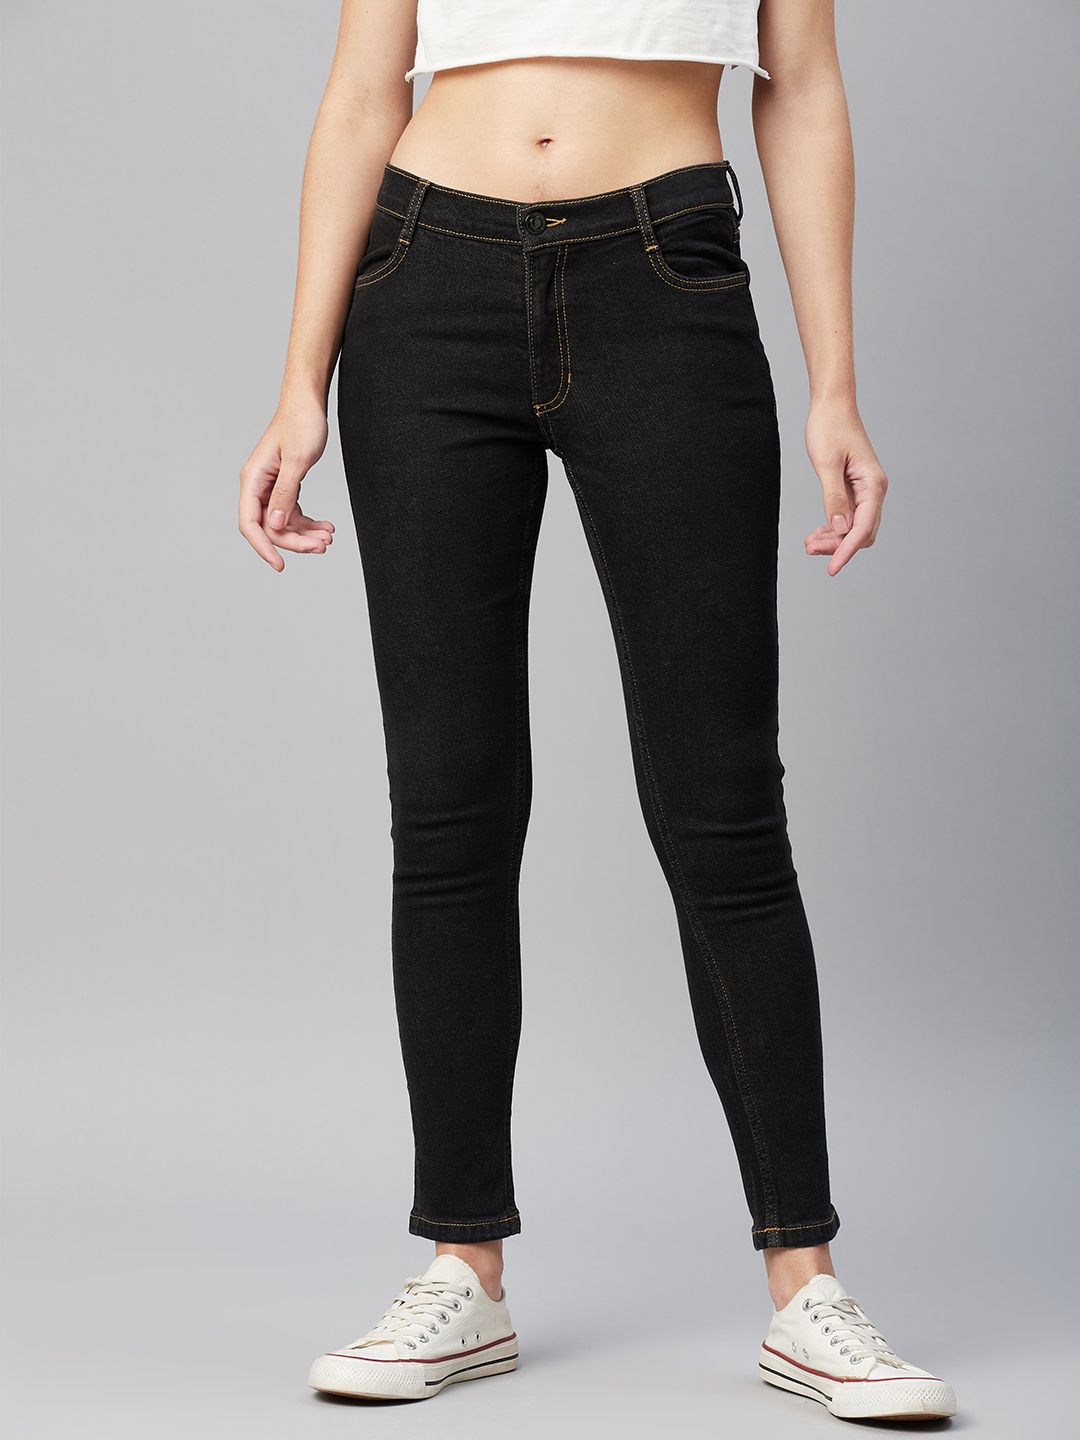 Marks & Spencer Women Black Skinny Fit Mid-Rise Jeans Price in India